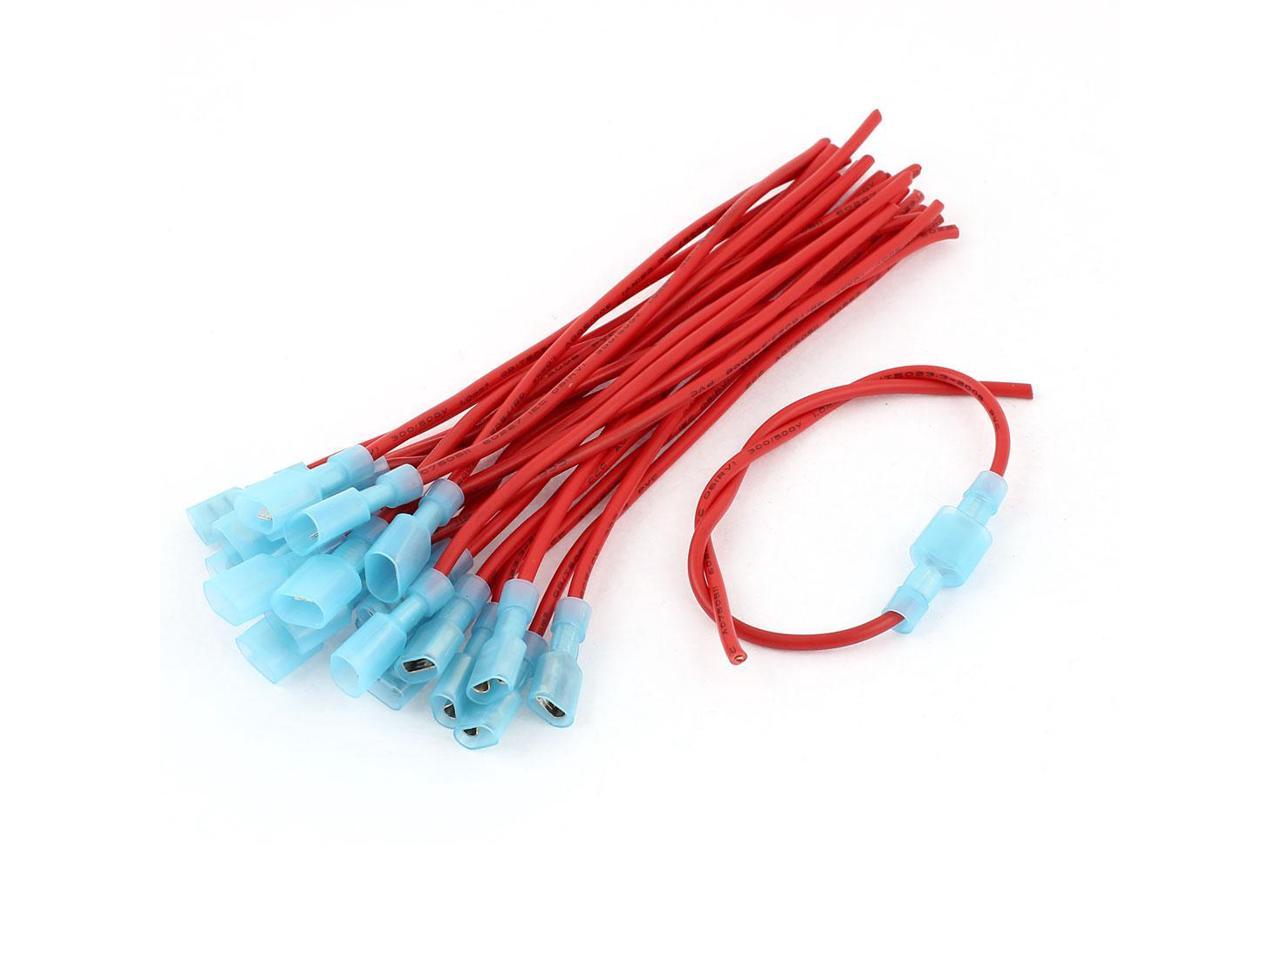 Global Bargains 12 Pairs 2 250 16 14 Awg Wire Insulated Spade Crimp Terminal Connector Newegg Com